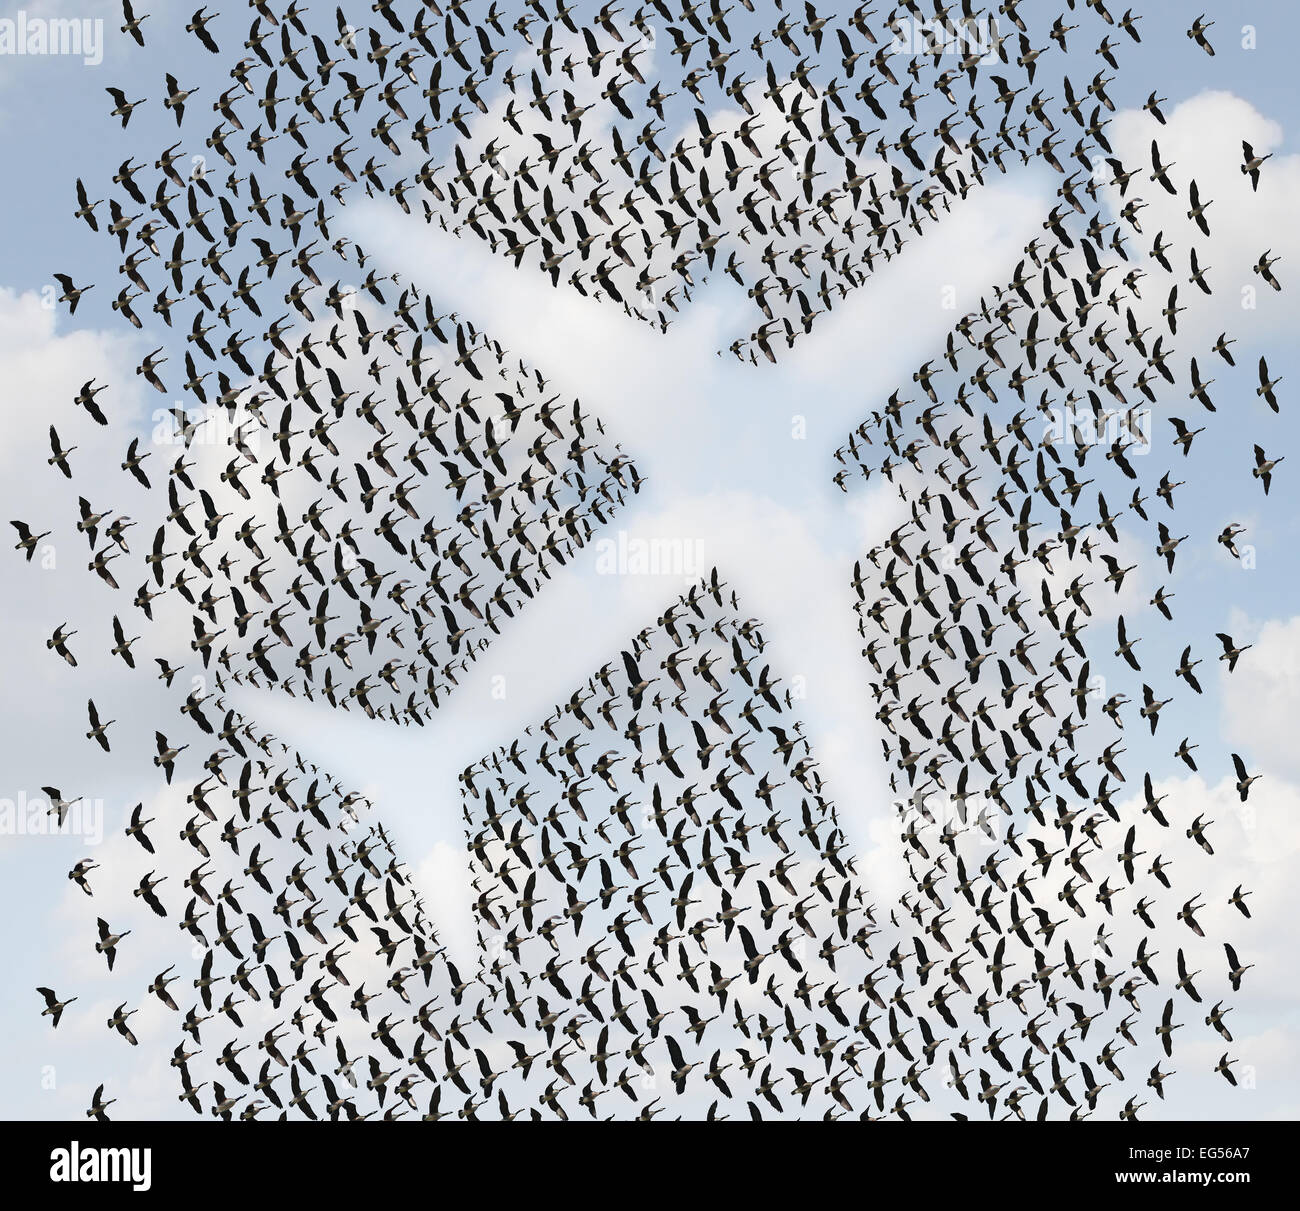 air-travel-concept-as-a-flock-of-flying-birds-or-geese-organized-in-EG56A7.jpg